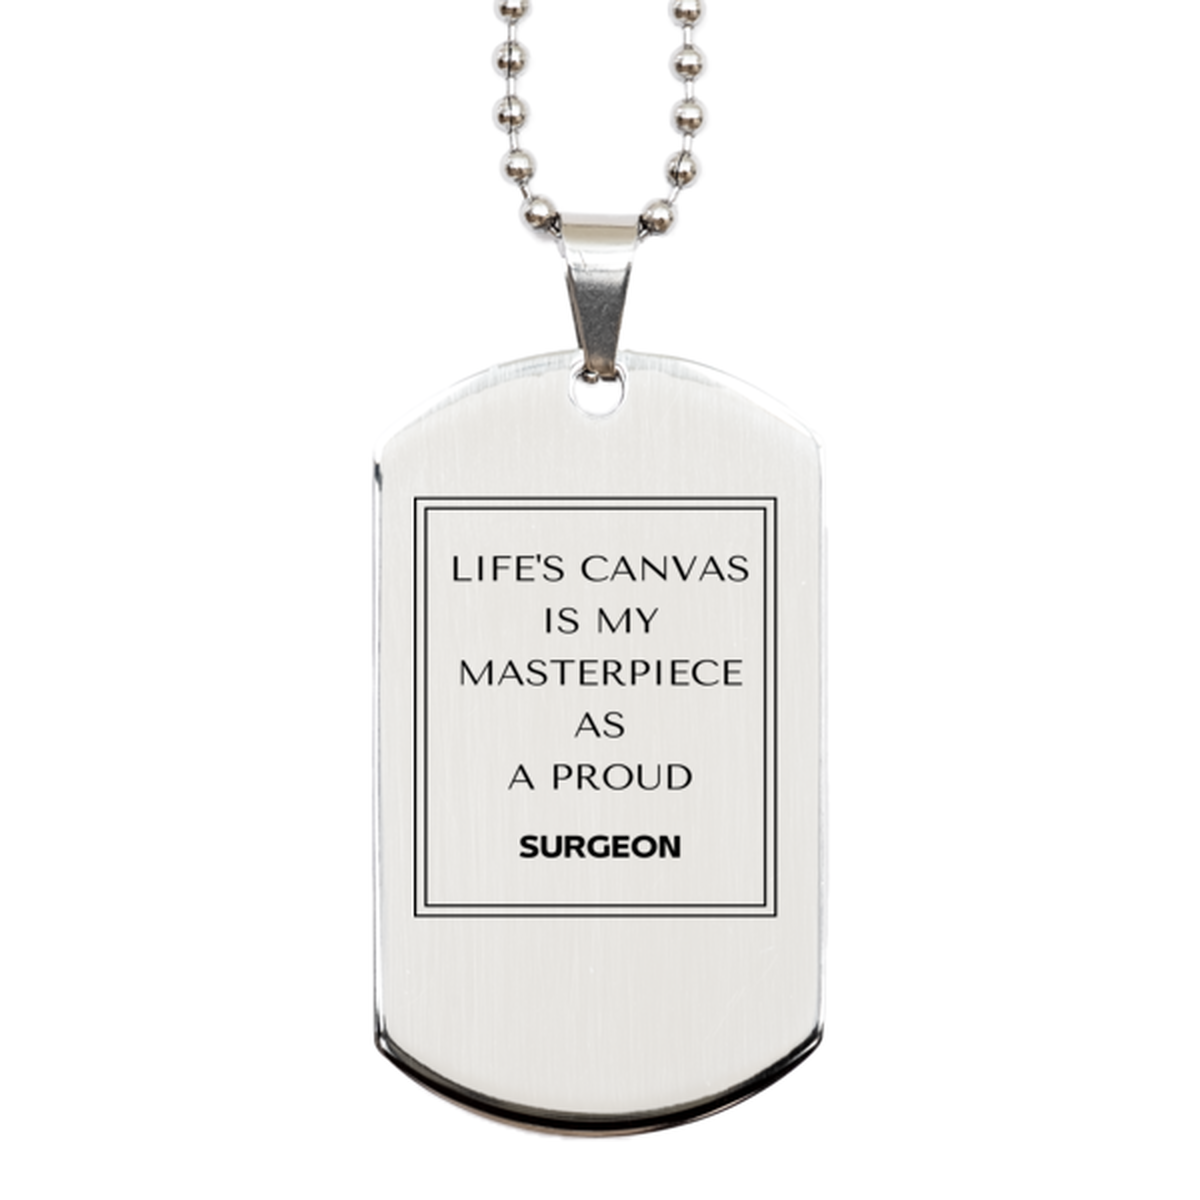 Proud Surgeon Gifts, Life's canvas is my masterpiece, Epic Birthday Christmas Unique Silver Dog Tag For Surgeon, Coworkers, Men, Women, Friends